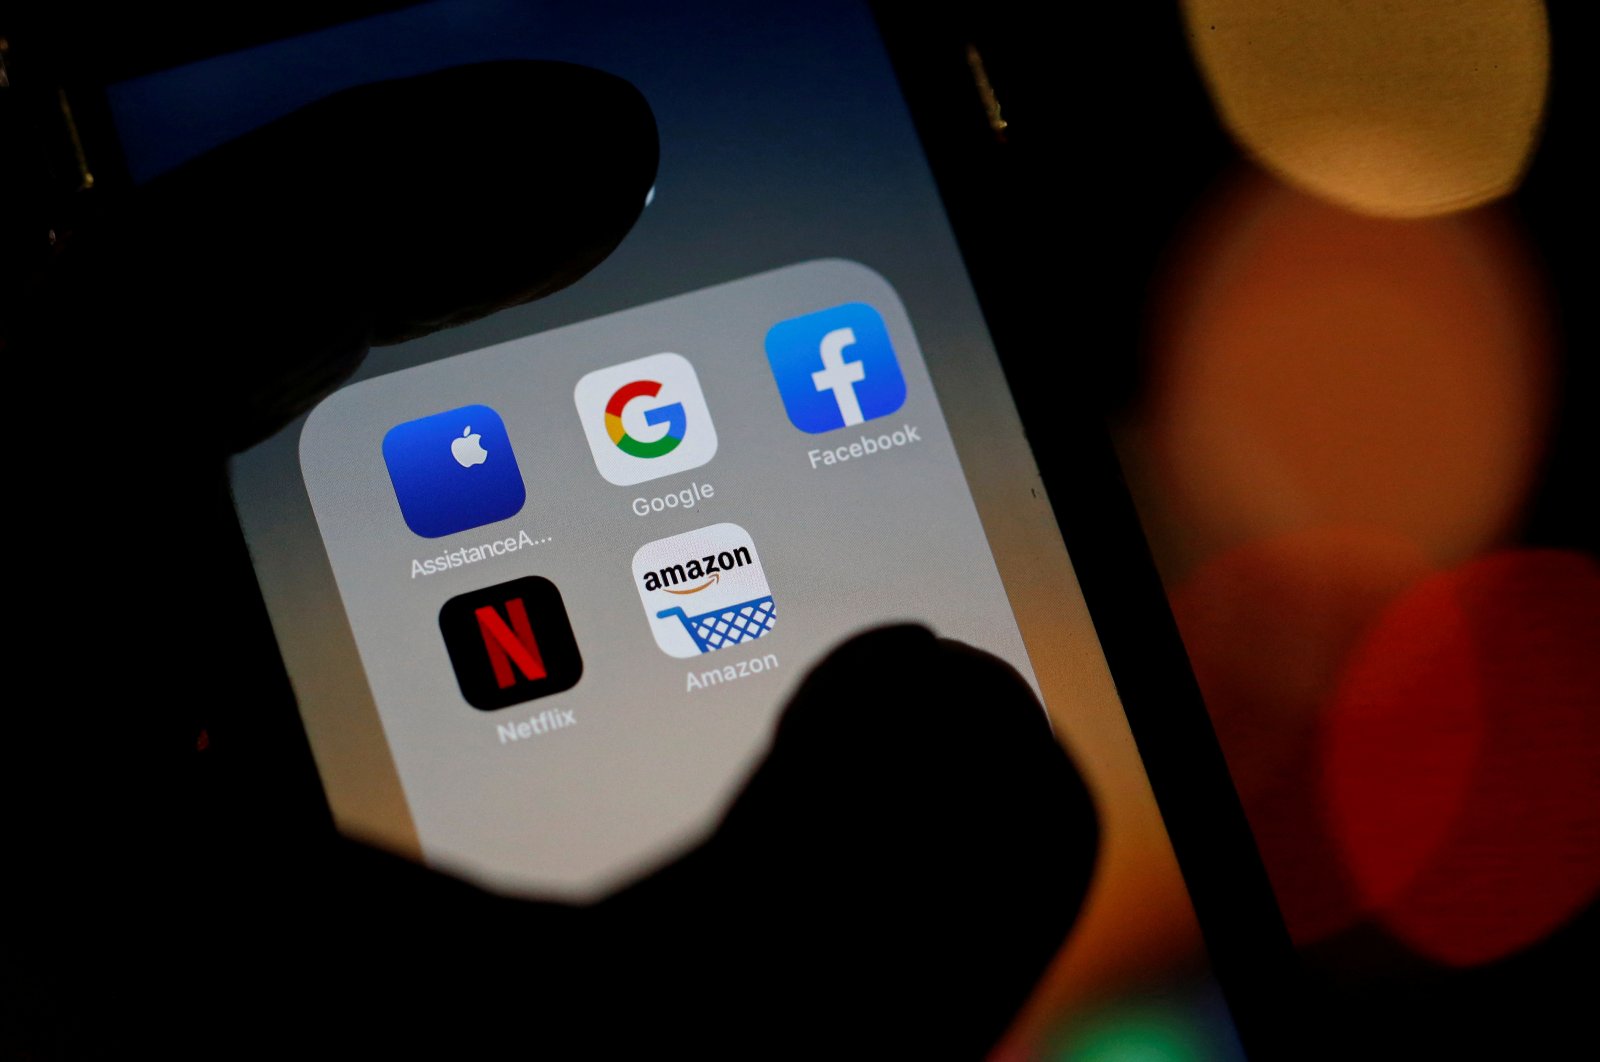 The logos of mobile apps, Google, Amazon, Facebook, Apple and Netflix, are displayed on a screen, Dec. 3, 2019. (Reuters Photo)